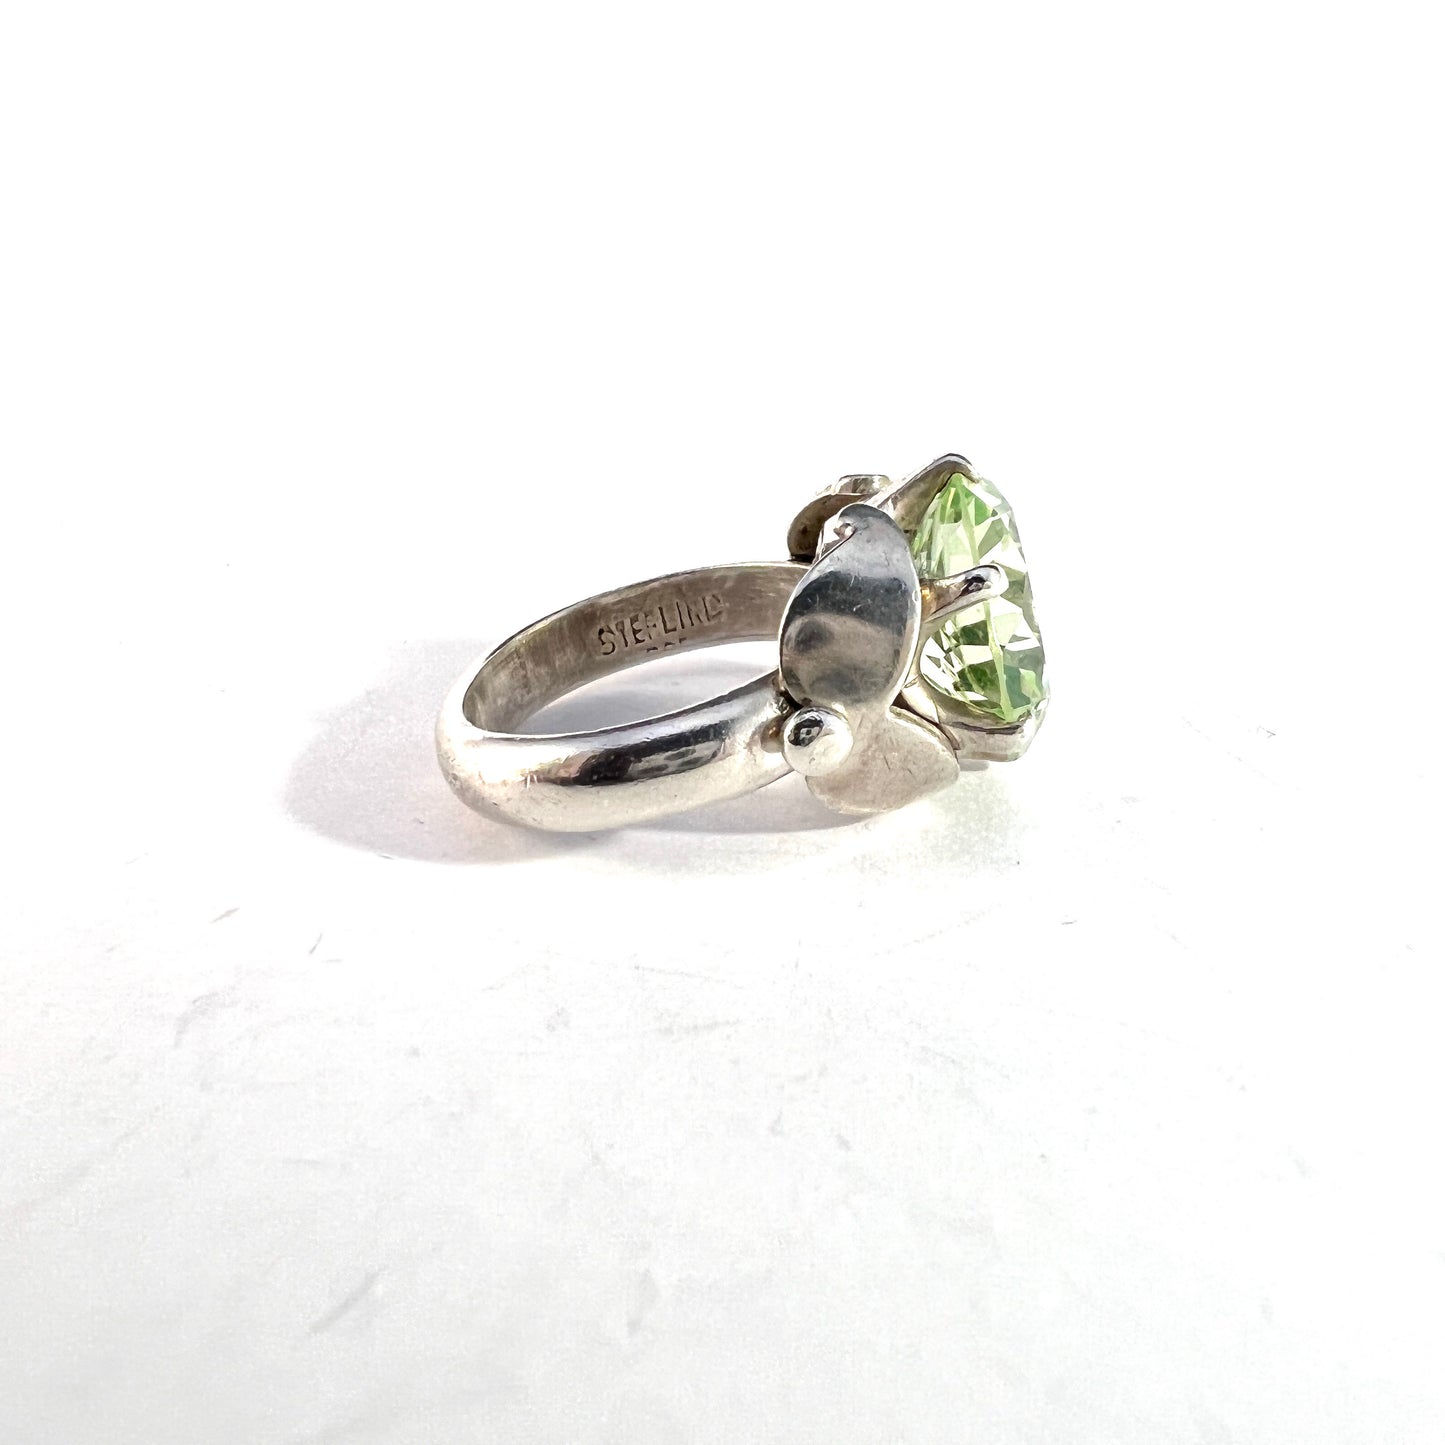 Taxco, Mexico. Vintage Sterling Silver Uranium Glass Ring